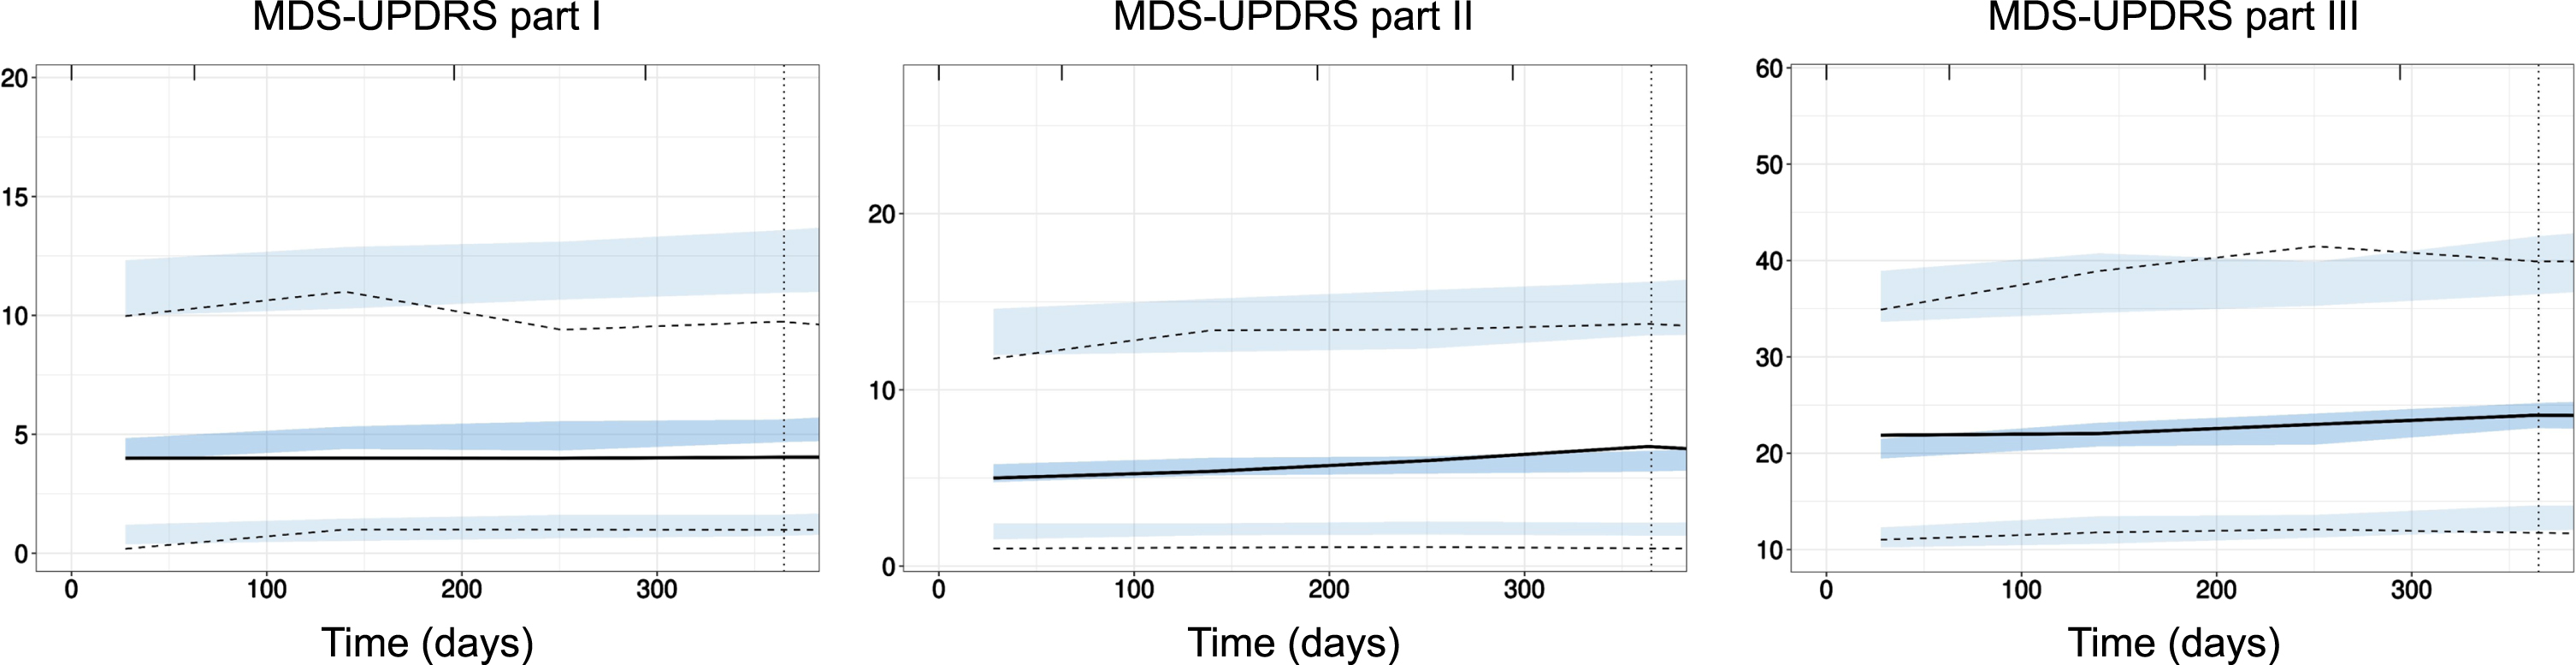 External evaluation of PPMI model on PASADENA placebo data. Prediction-corrected visual predictive check (pcVPC) of PPMI model prediction (blue shaded areas, 90% confidence interval around the 5th, 50th, and 95th percentiles) with data from PASADENA placebo cohort (black lines). Left panel: MDS-UPDRS part I; Middle panel: MDS-UPDRS part II; Right panel: MDS-UPDRS part III off. Time in days.